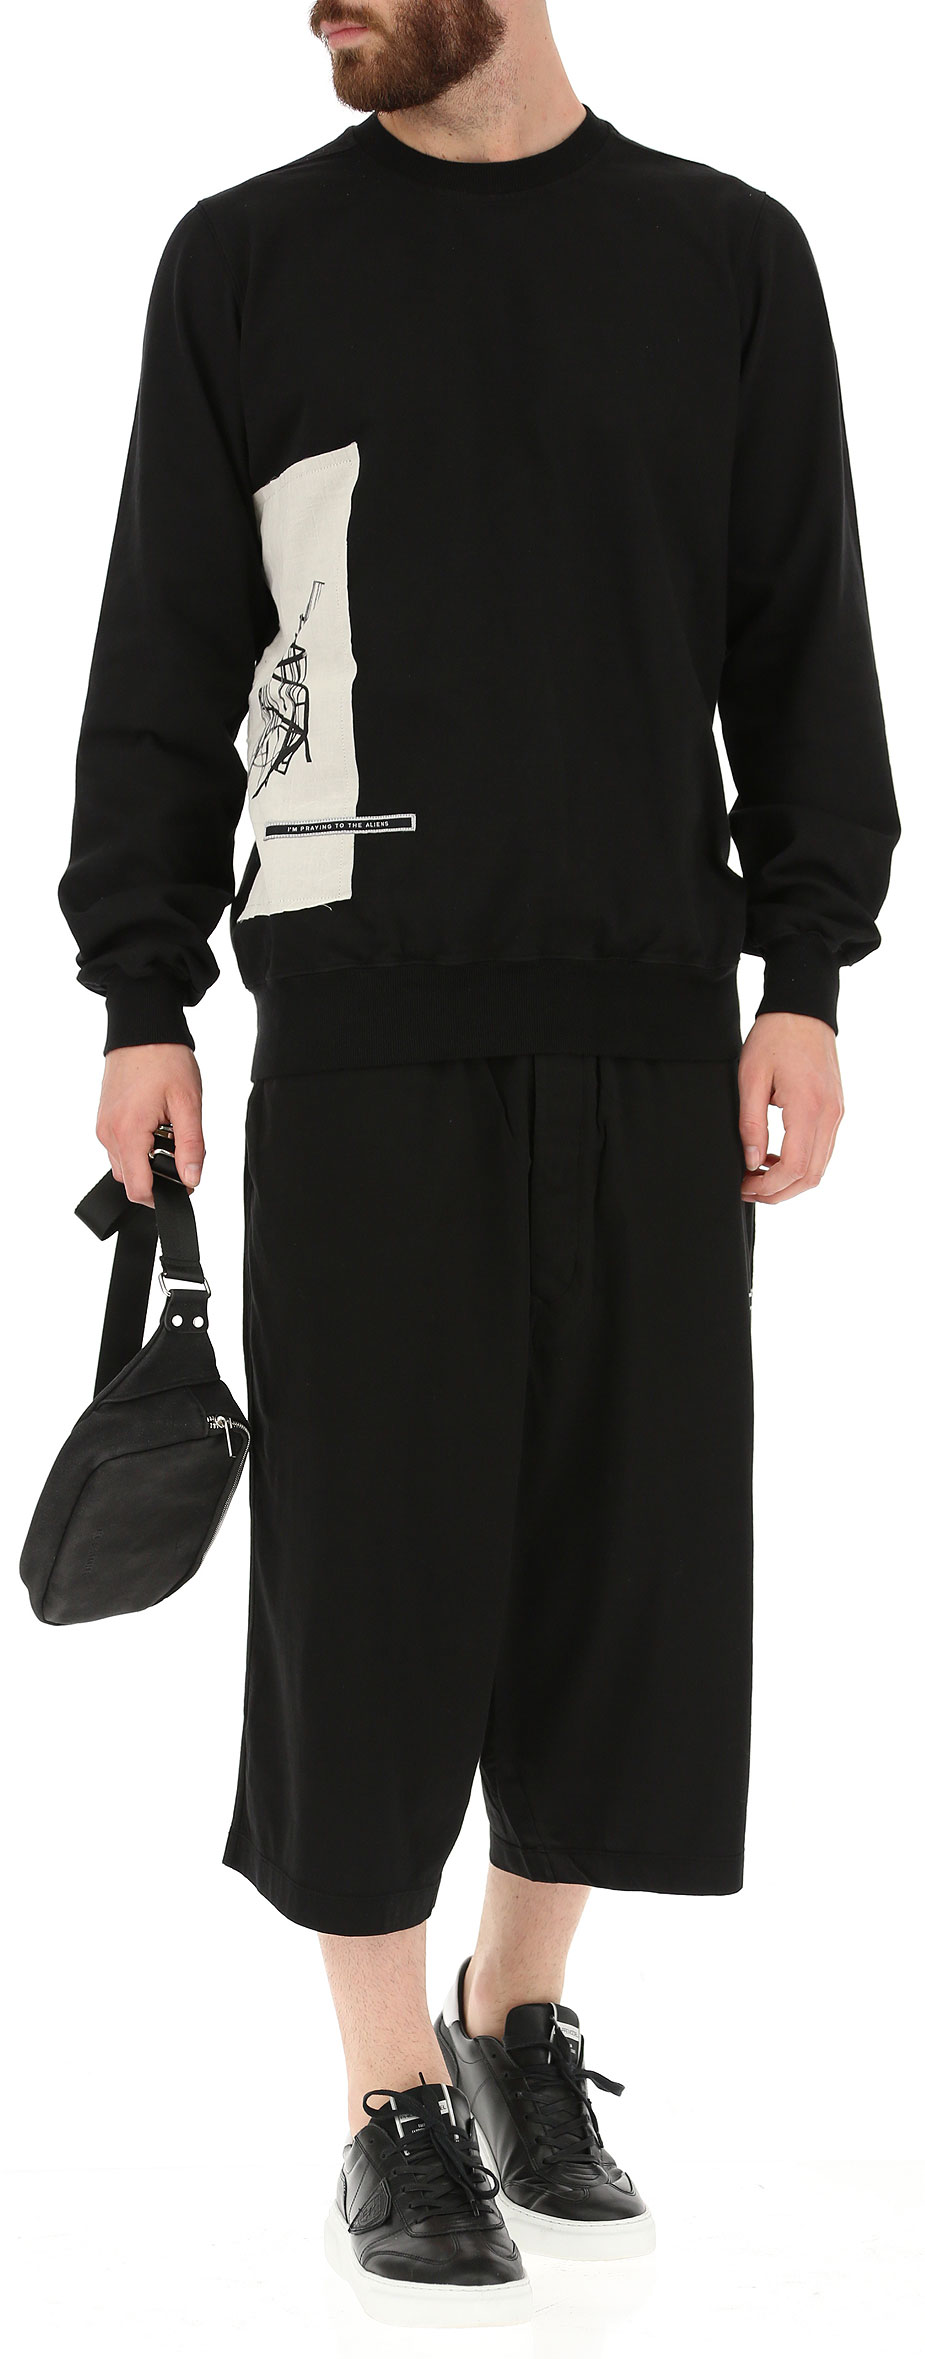 Mens Clothing Rick Owens DRKSHDW, Style code: du19s4270-rigep1-09